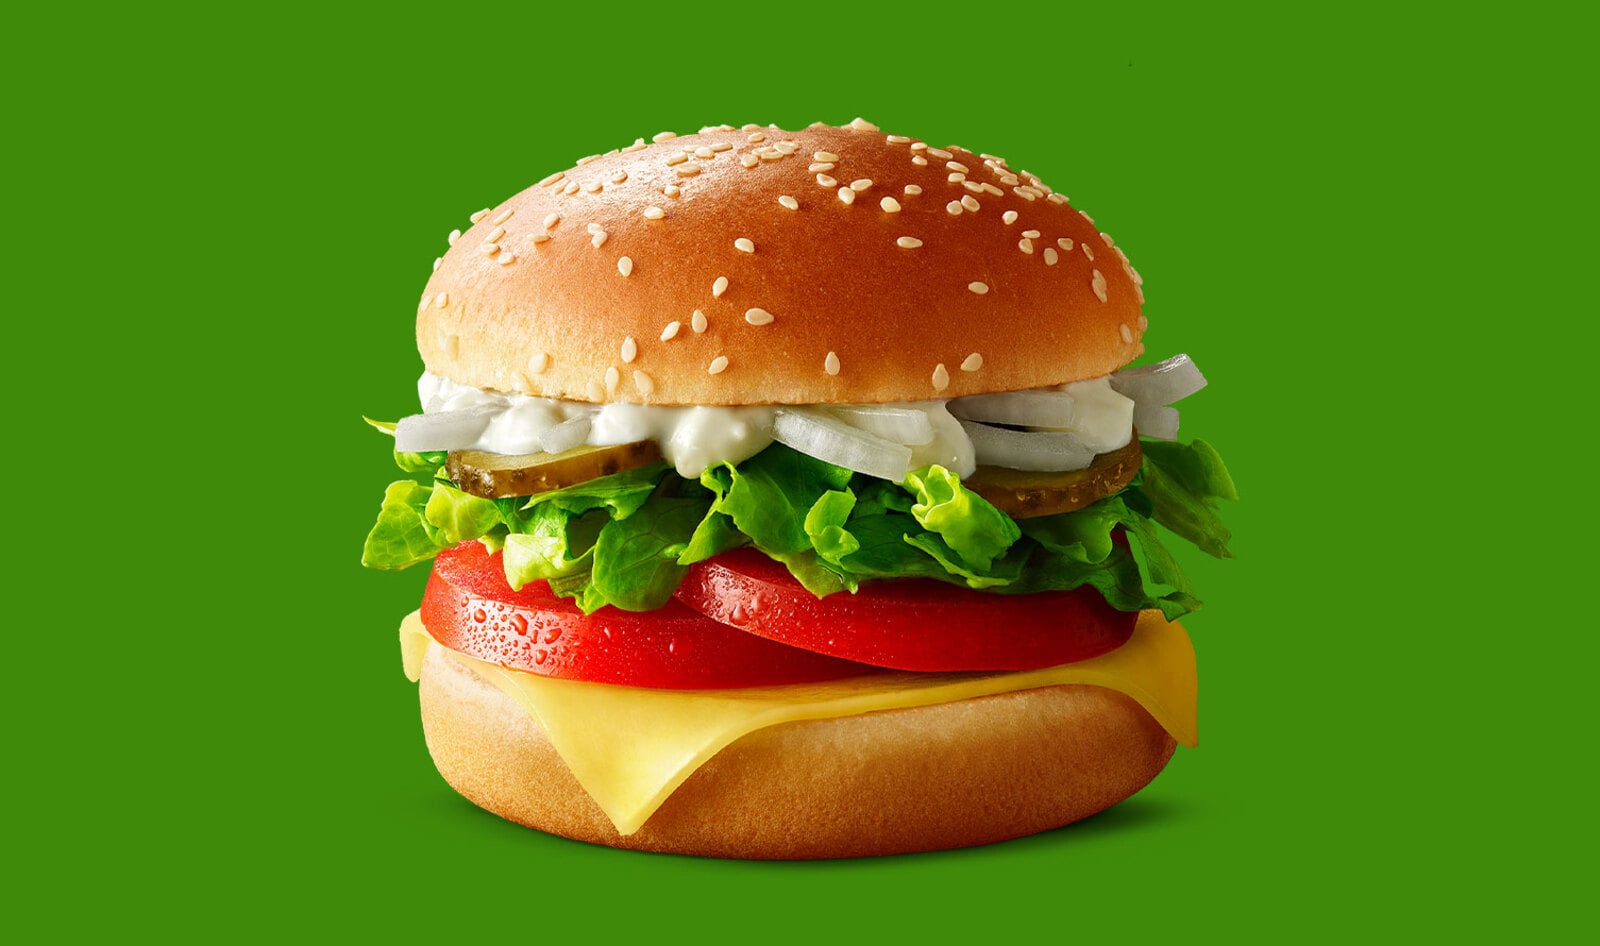 Can a Salad Burger Cut It as a Meatless Option? McDonald’s Gives It a Try